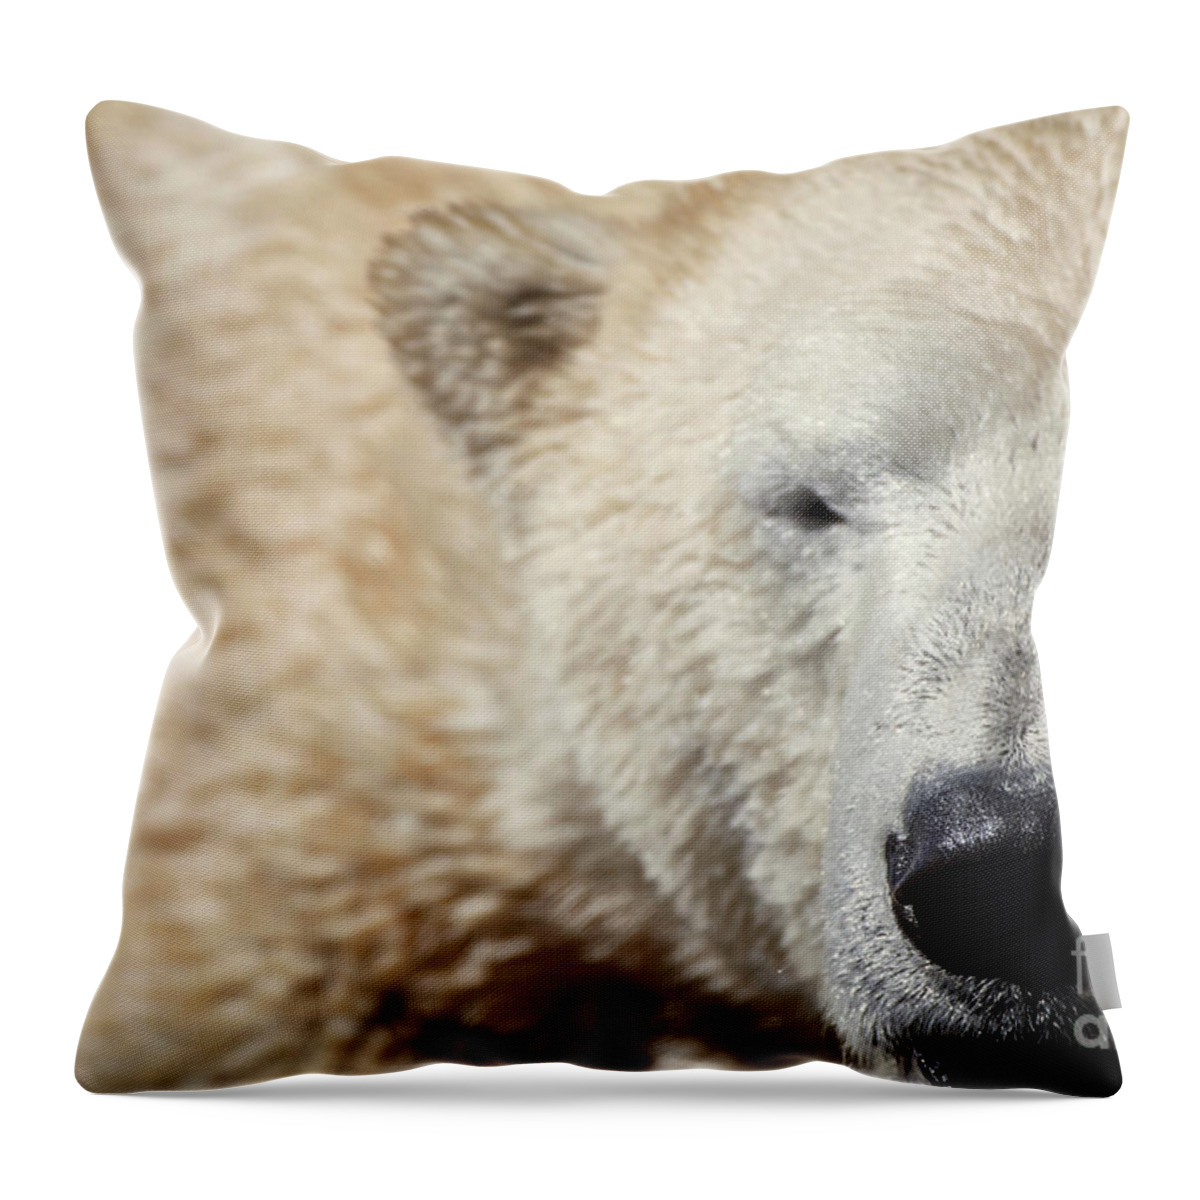 Wildlife Throw Pillow featuring the photograph Smile by Robert WK Clark